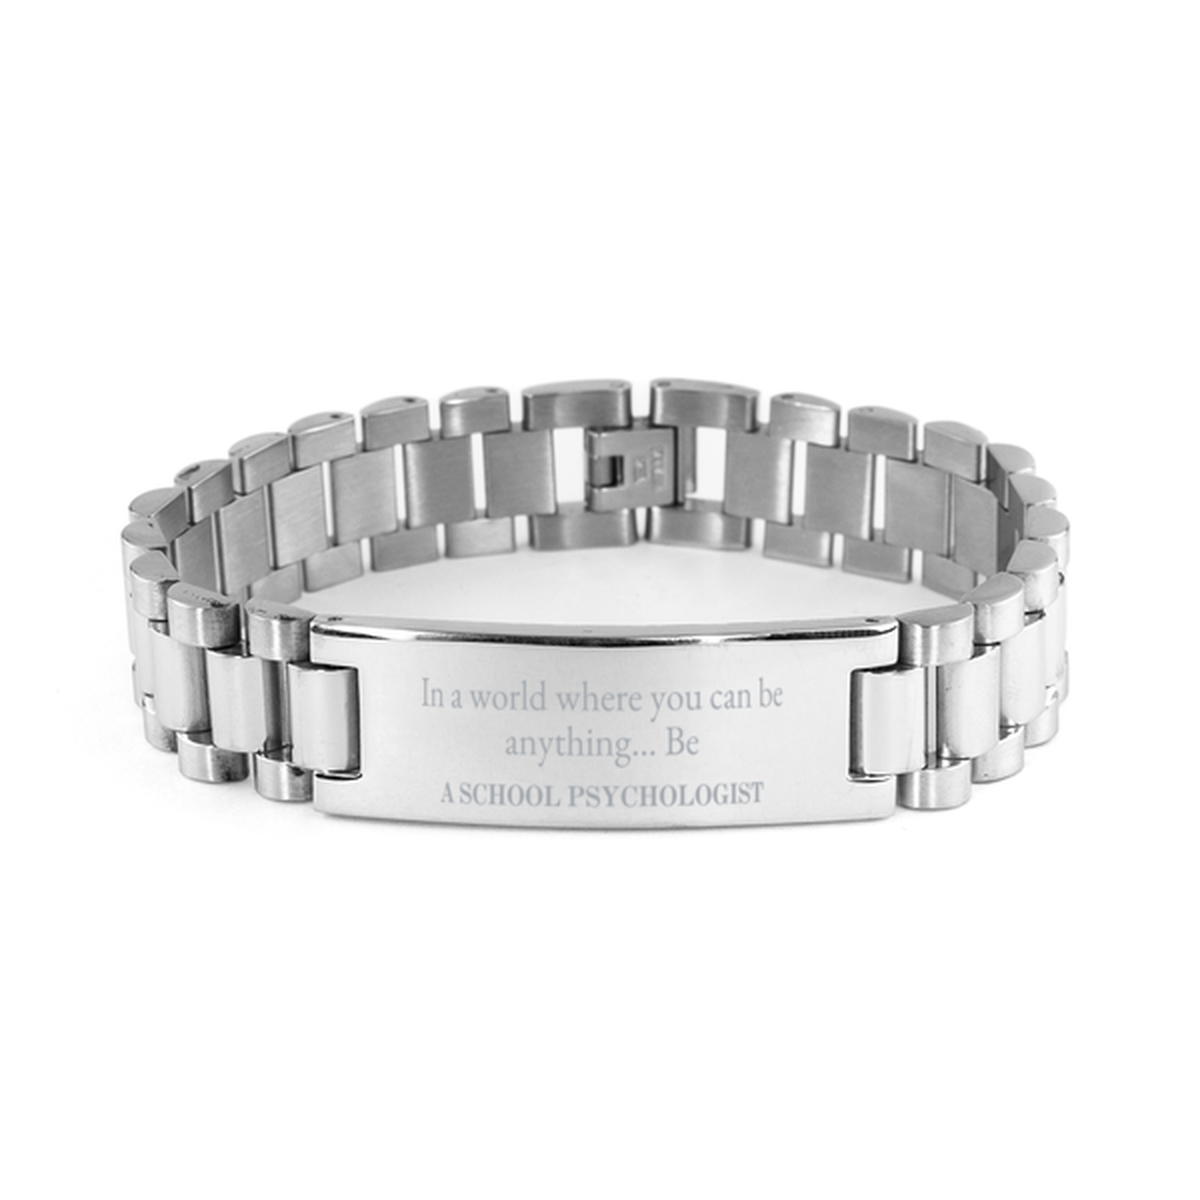 Gifts for School Psychologist, In a world where you can be anything, Appreciation Birthday Ladder Stainless Steel Bracelet for Men, Women, Friends, Coworkers